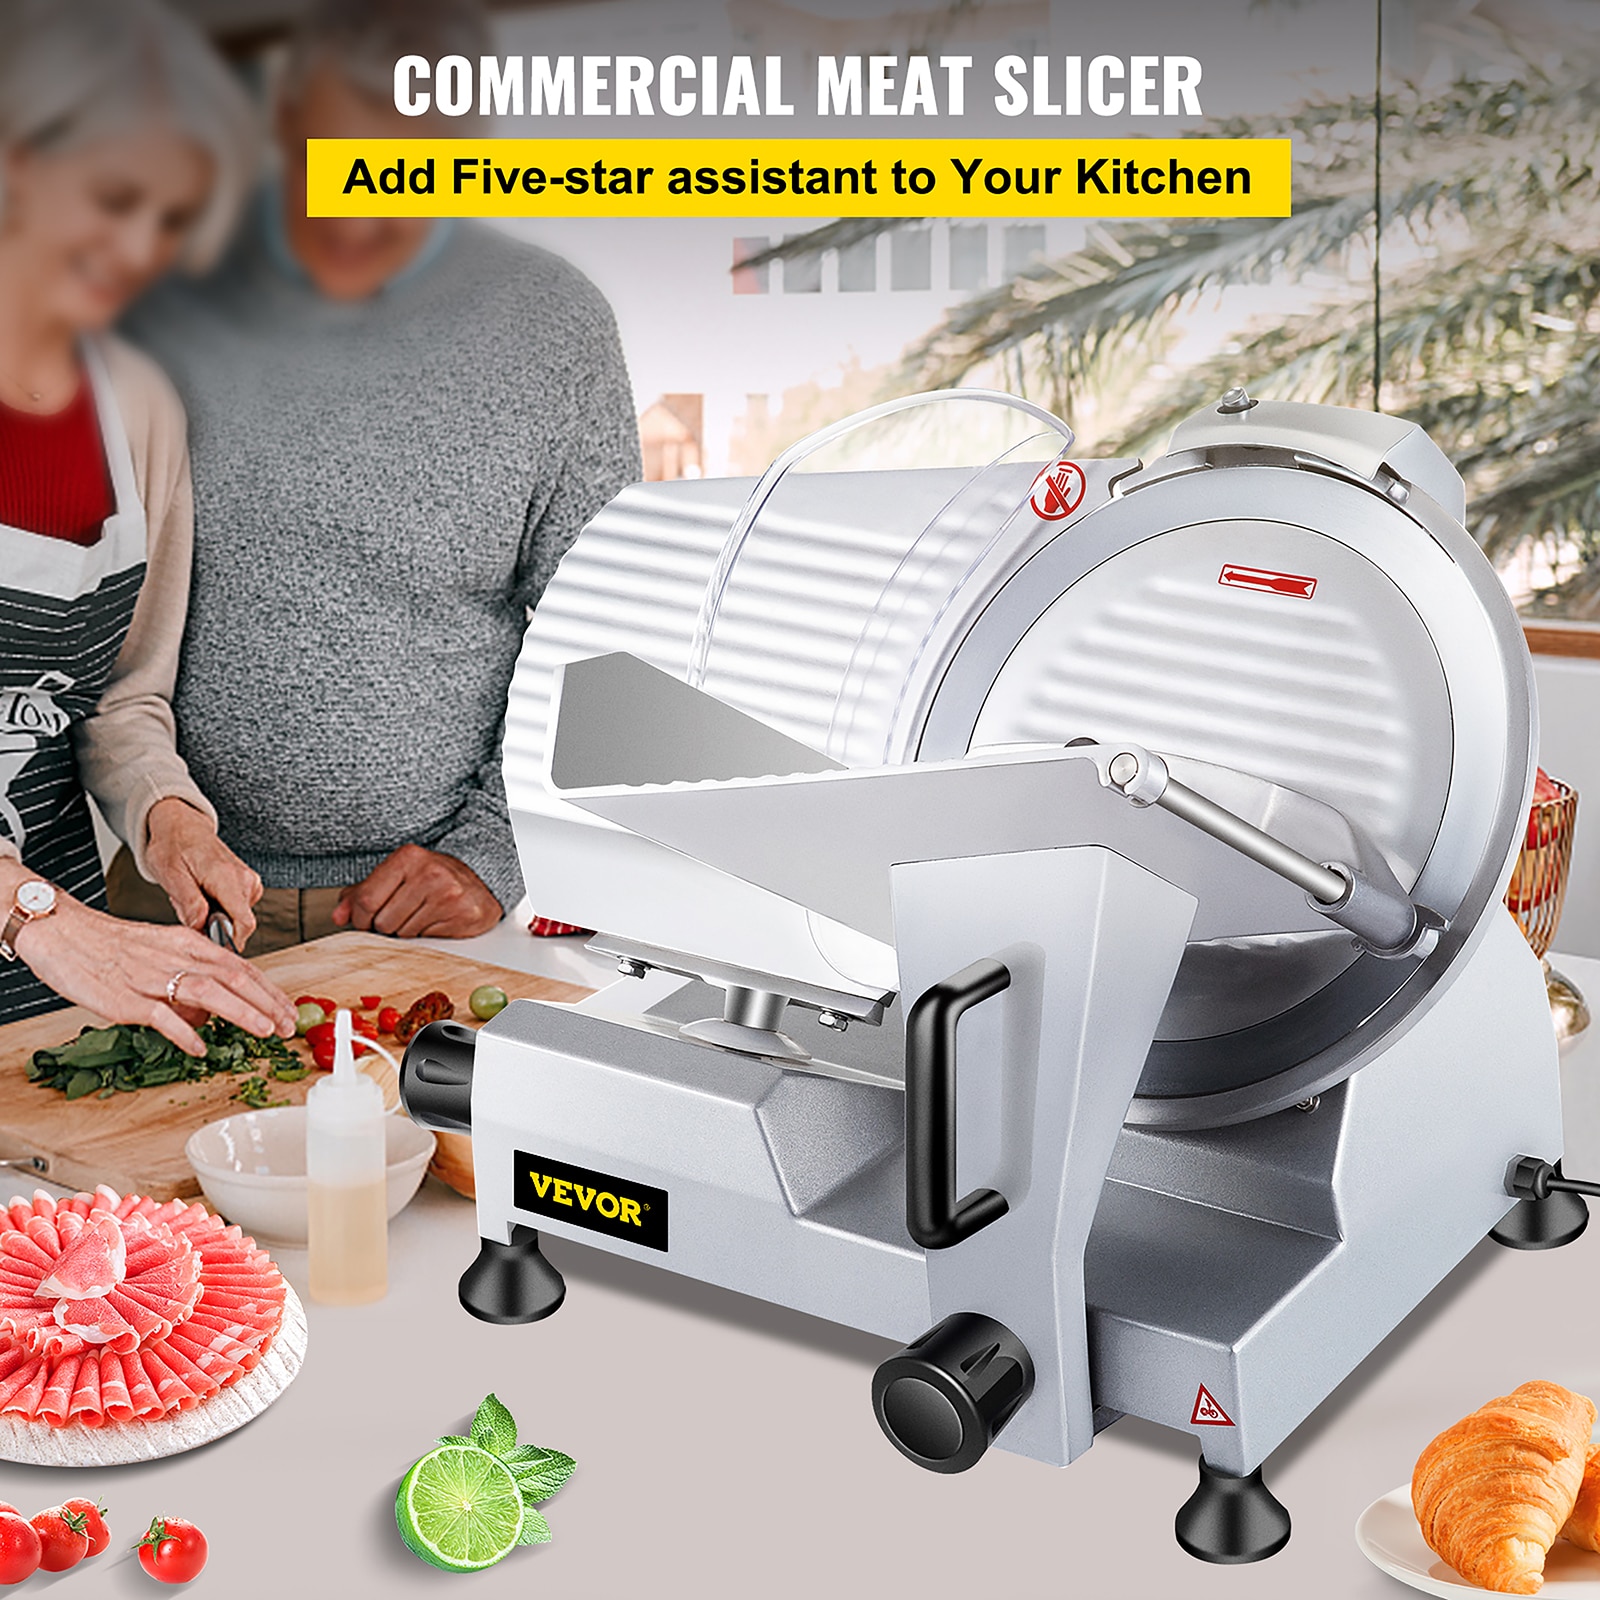 VEVOR Commercial/Residential Food in the Food Slicers department at Lowes.com